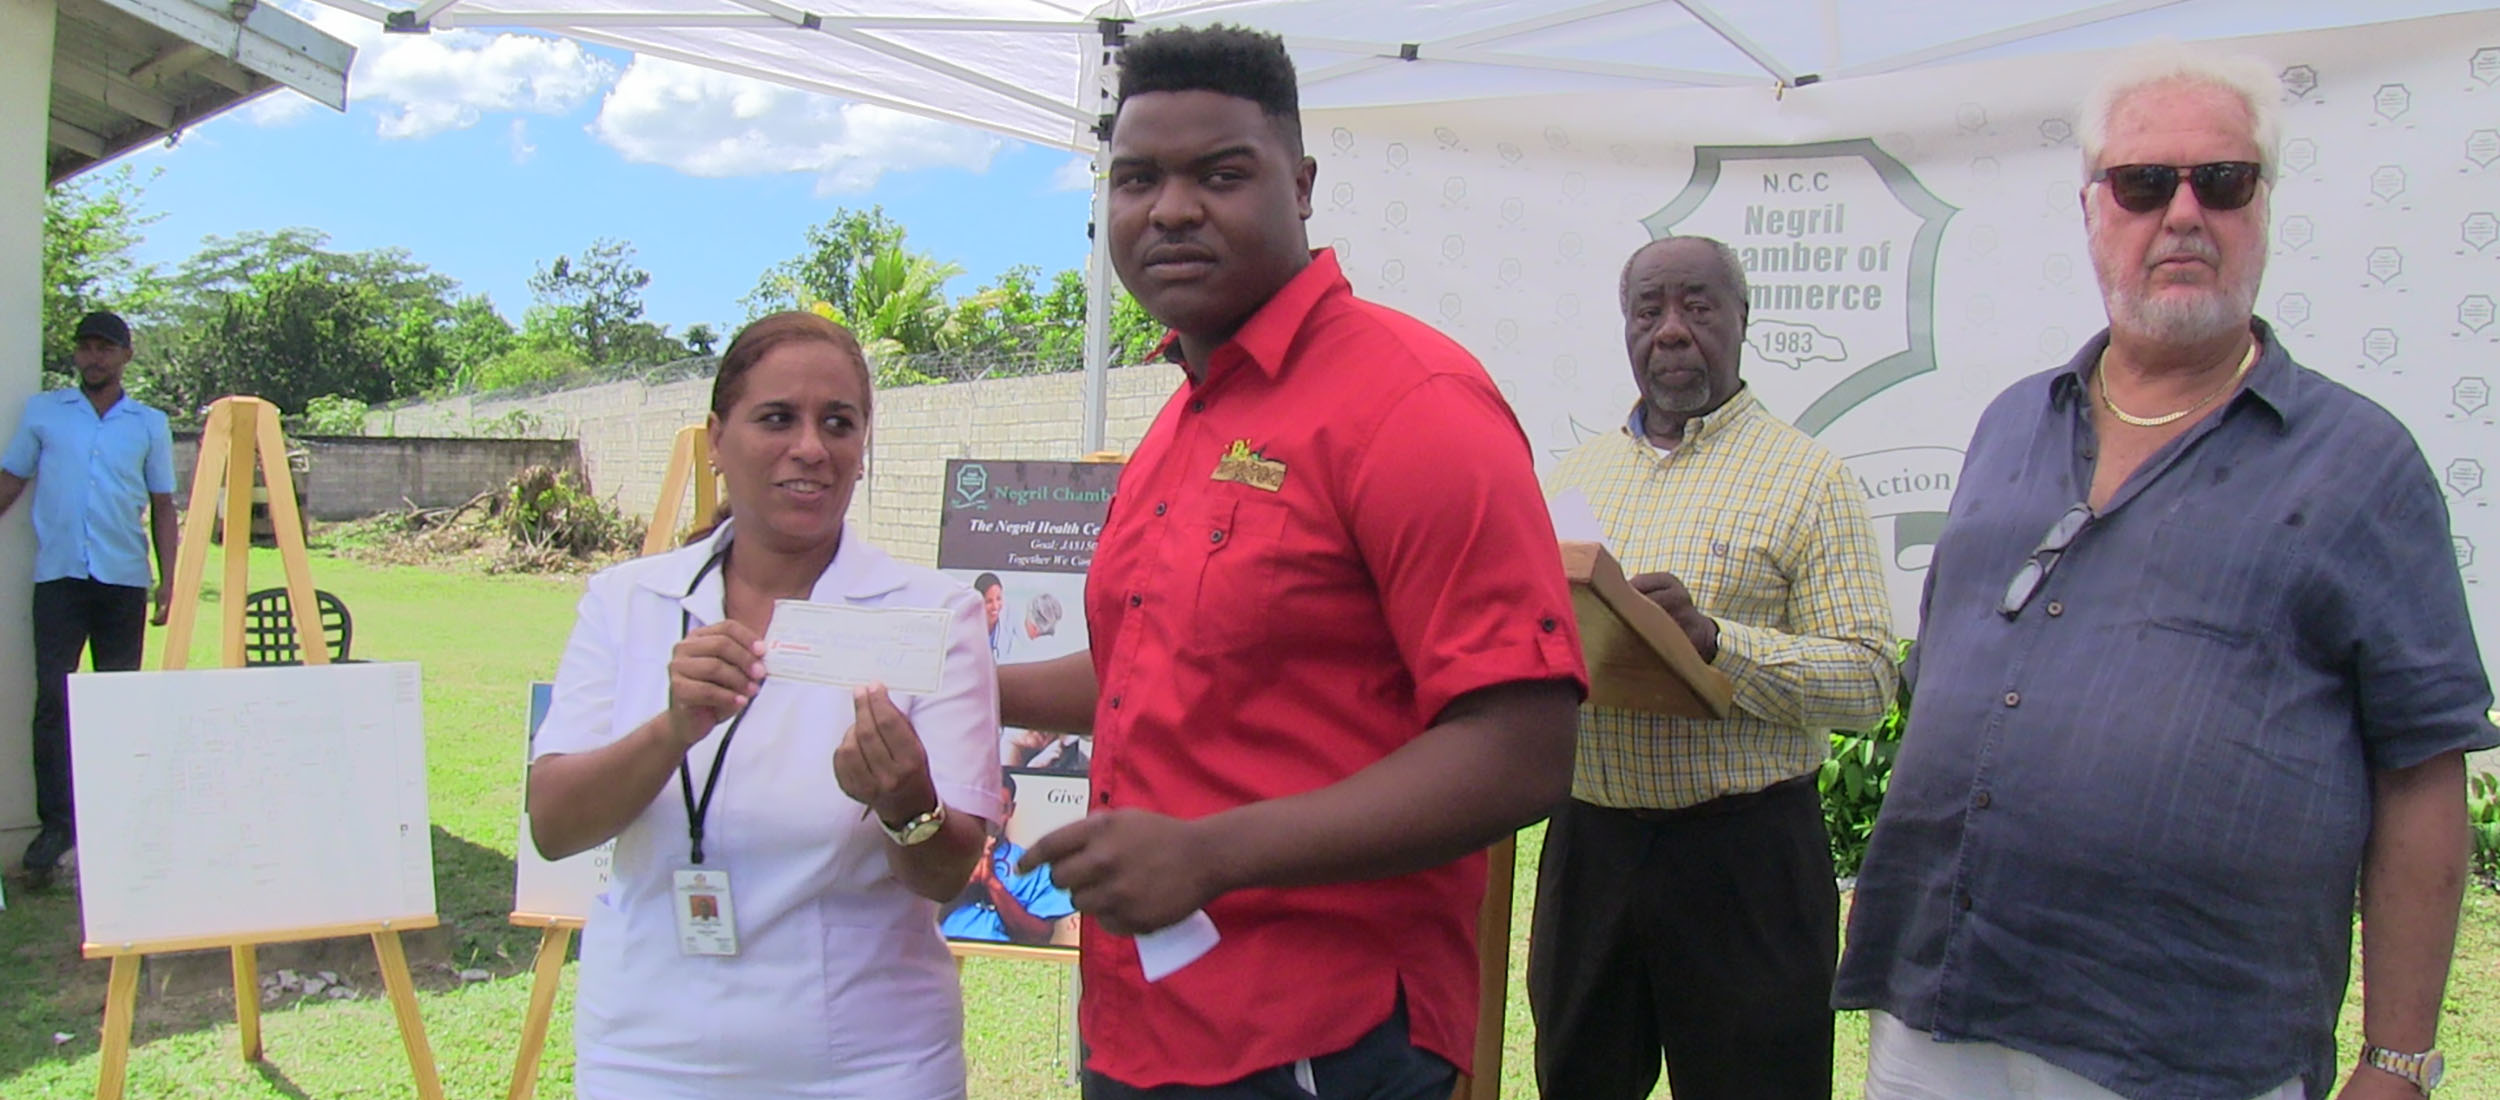 Woodstock Negril presents $300,000.00 check to Negril Community Centre Fund